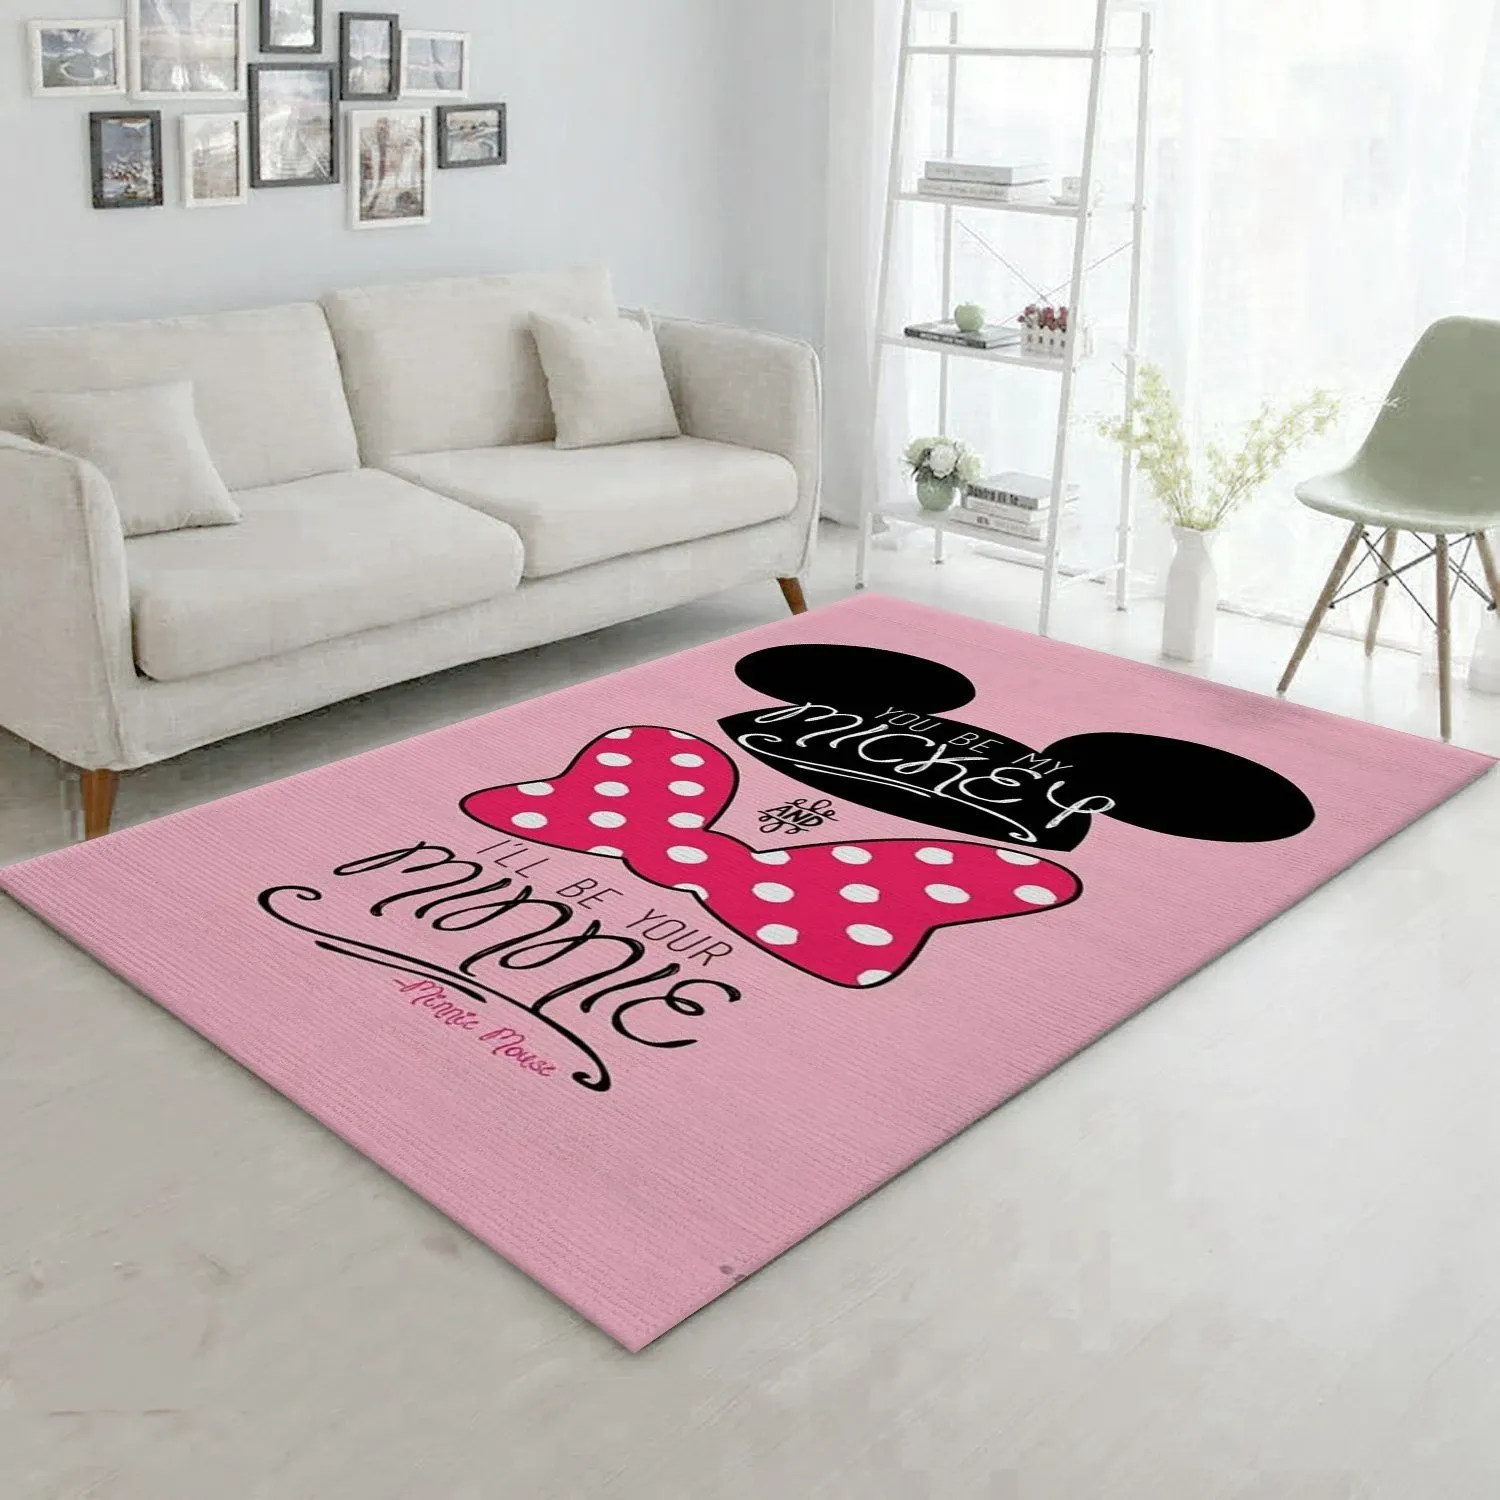 Mickey Minnie Mouse Disney Rug Bedroom Christmas Gift US Decor - Indoor Outdoor Rugs 2